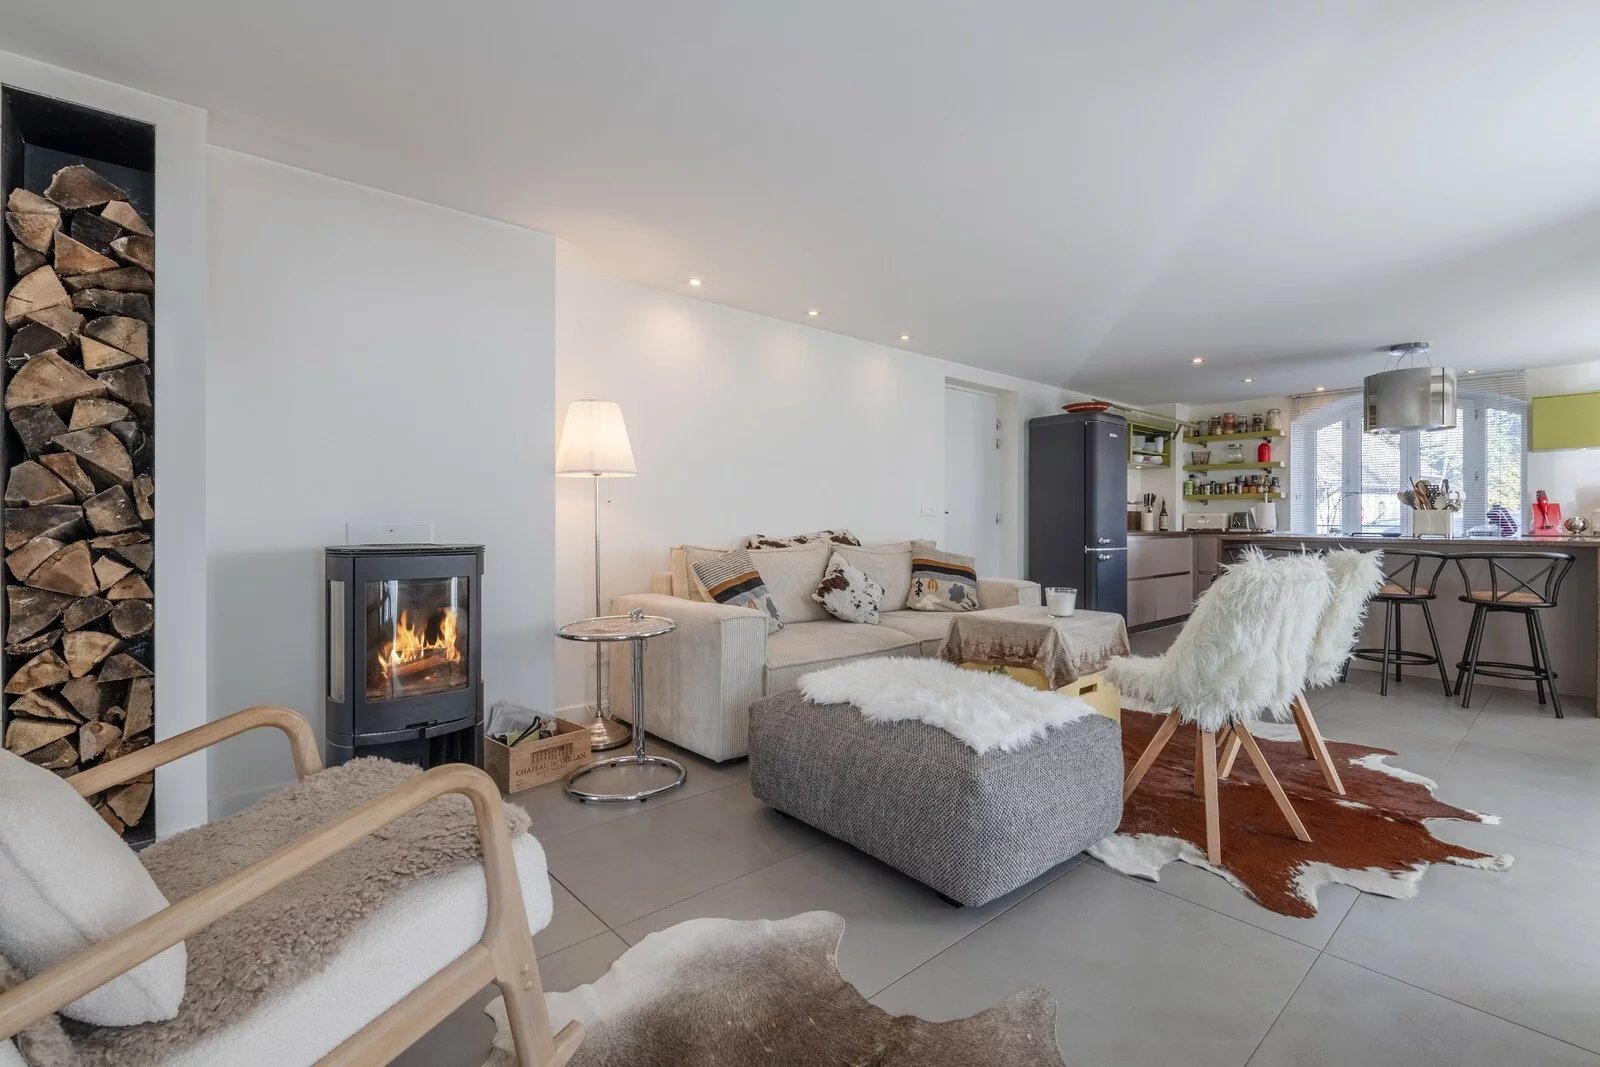 CHARMING 3 BEDROOM APARTMENT IN THE HEART OF LES HOUCHES